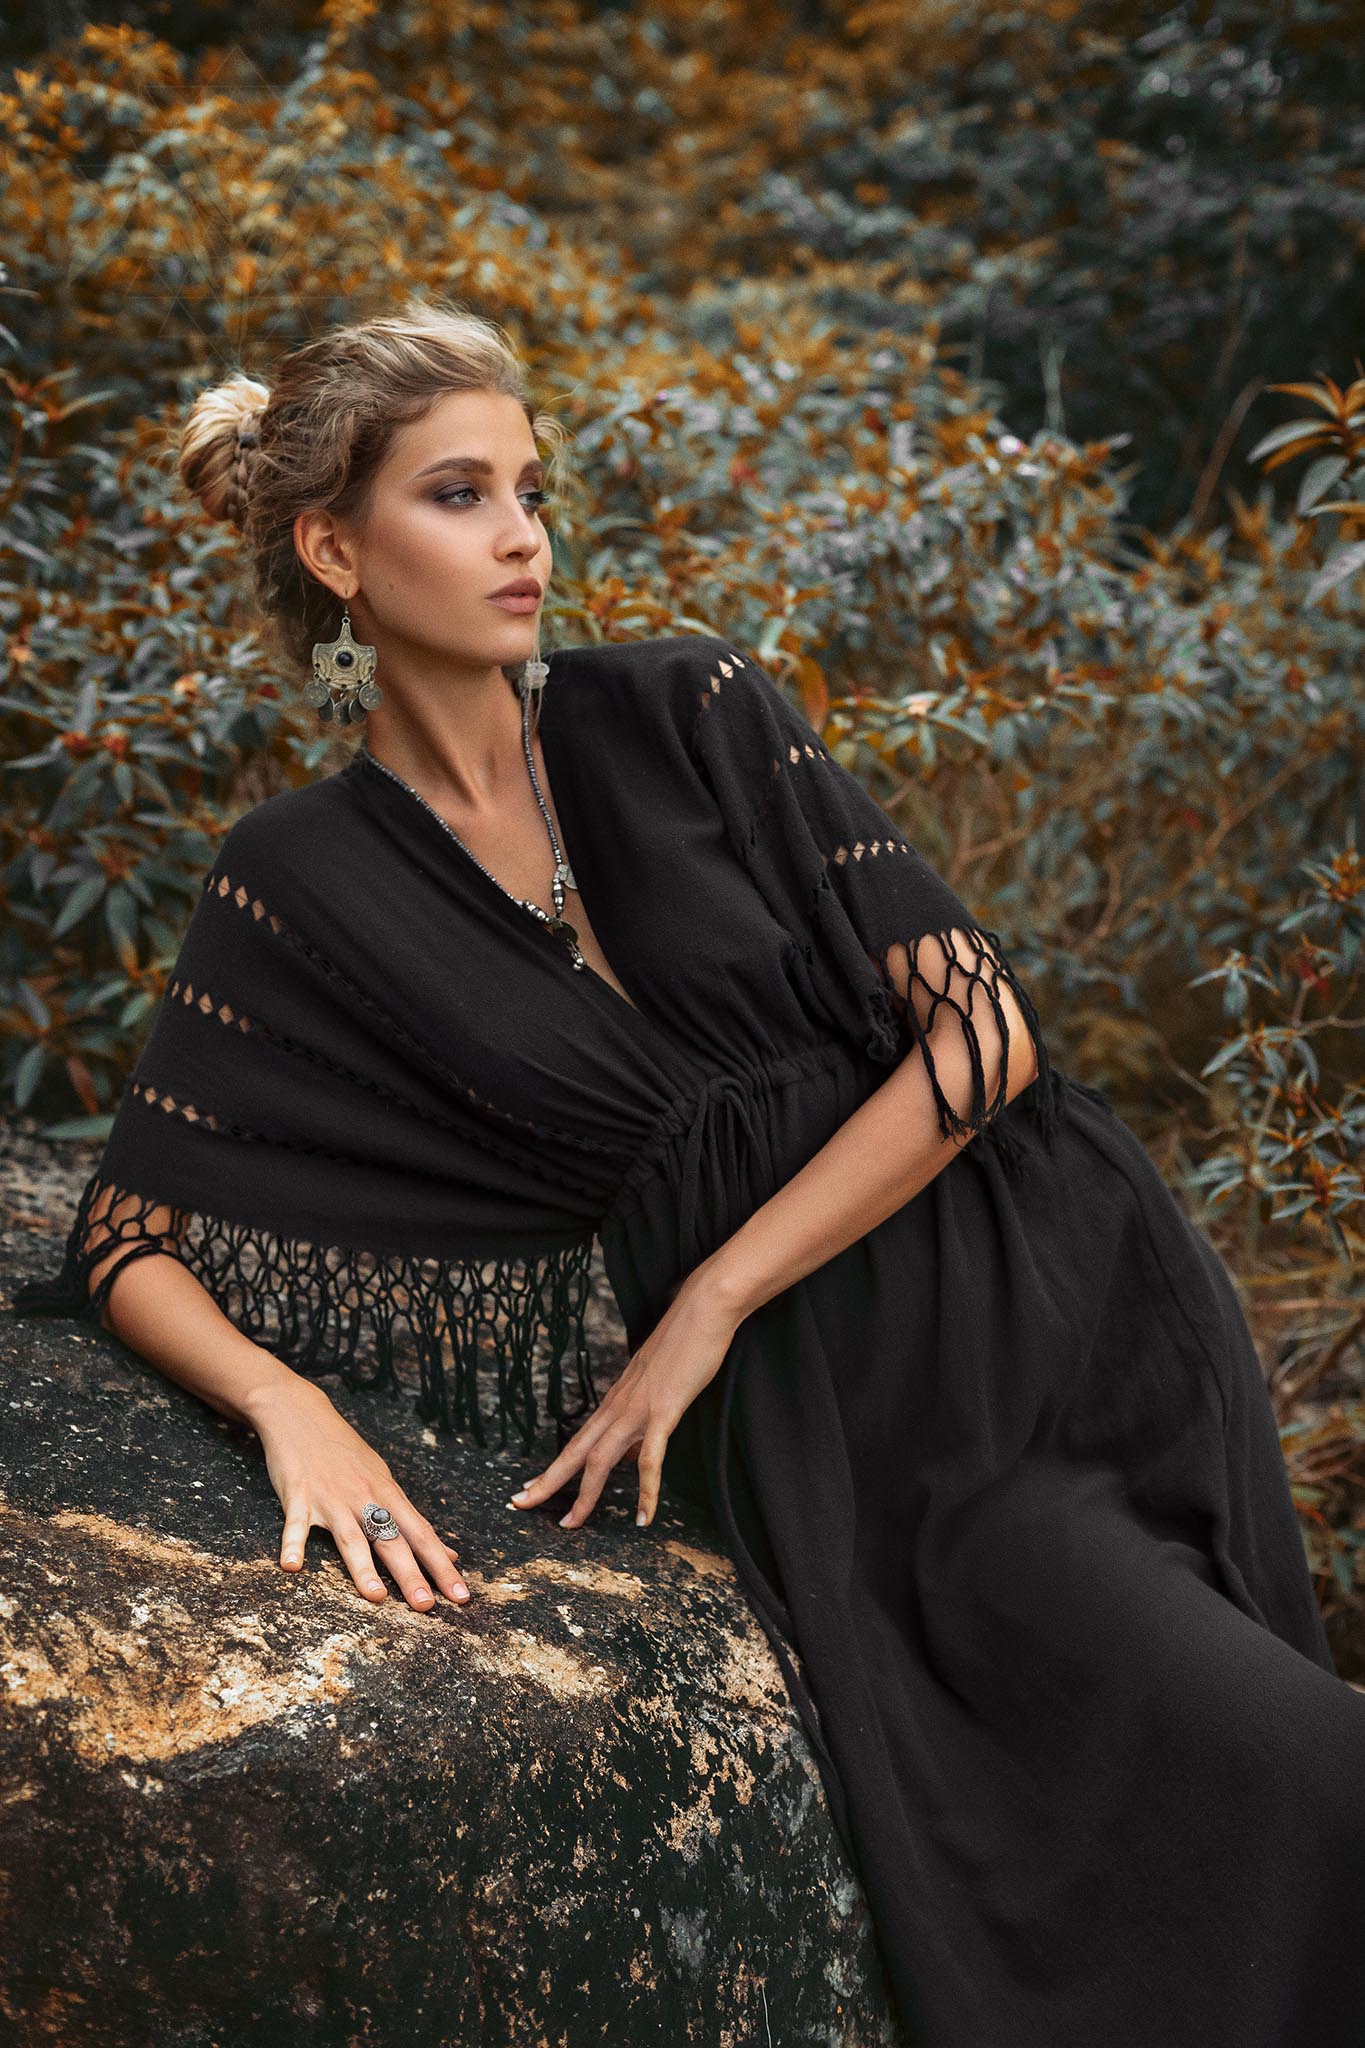 This black boho dress is perfect for any woman who wants to look her best.